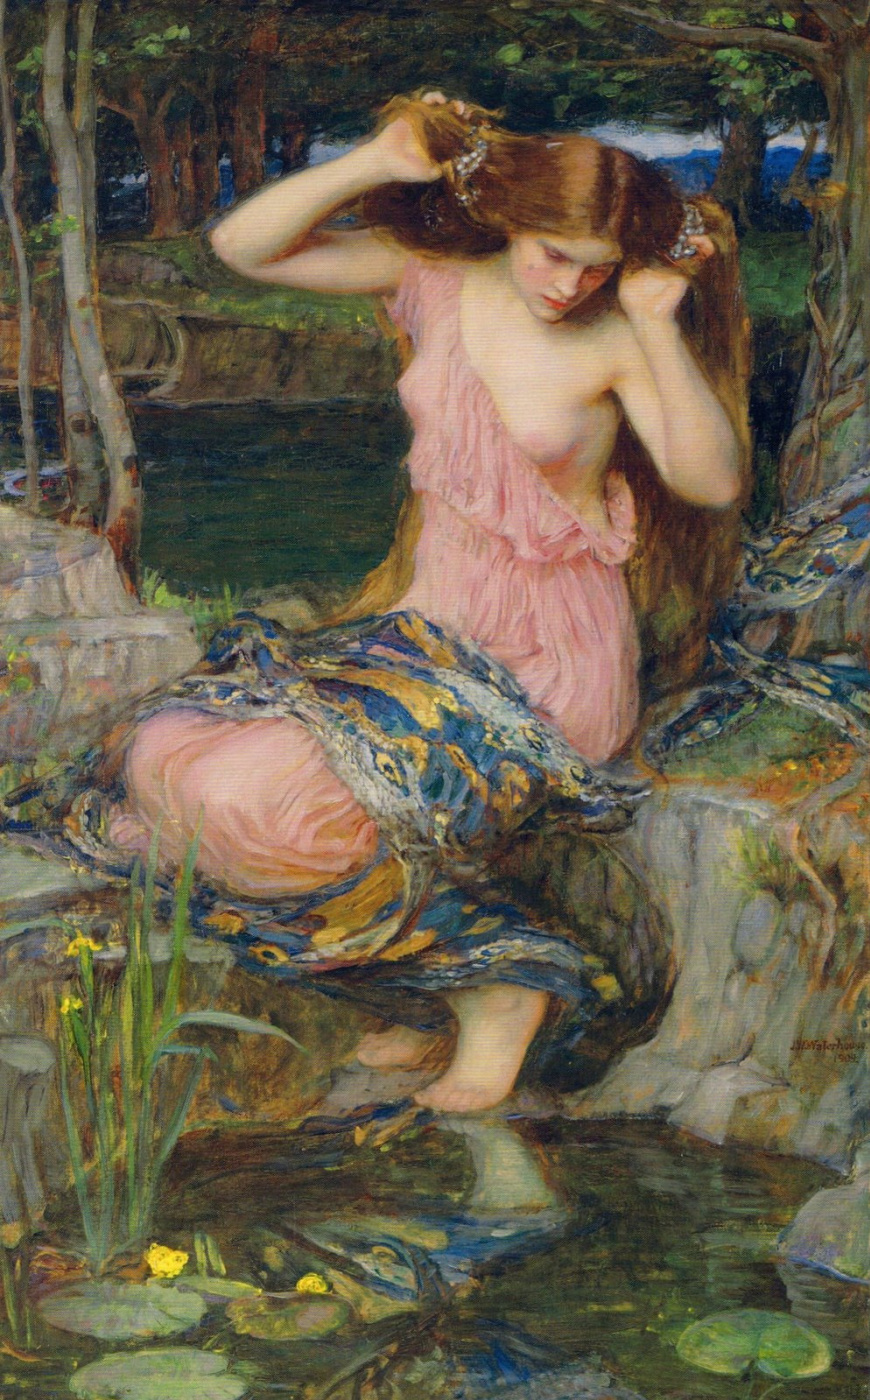 John William Waterhouse. Witch at the pond